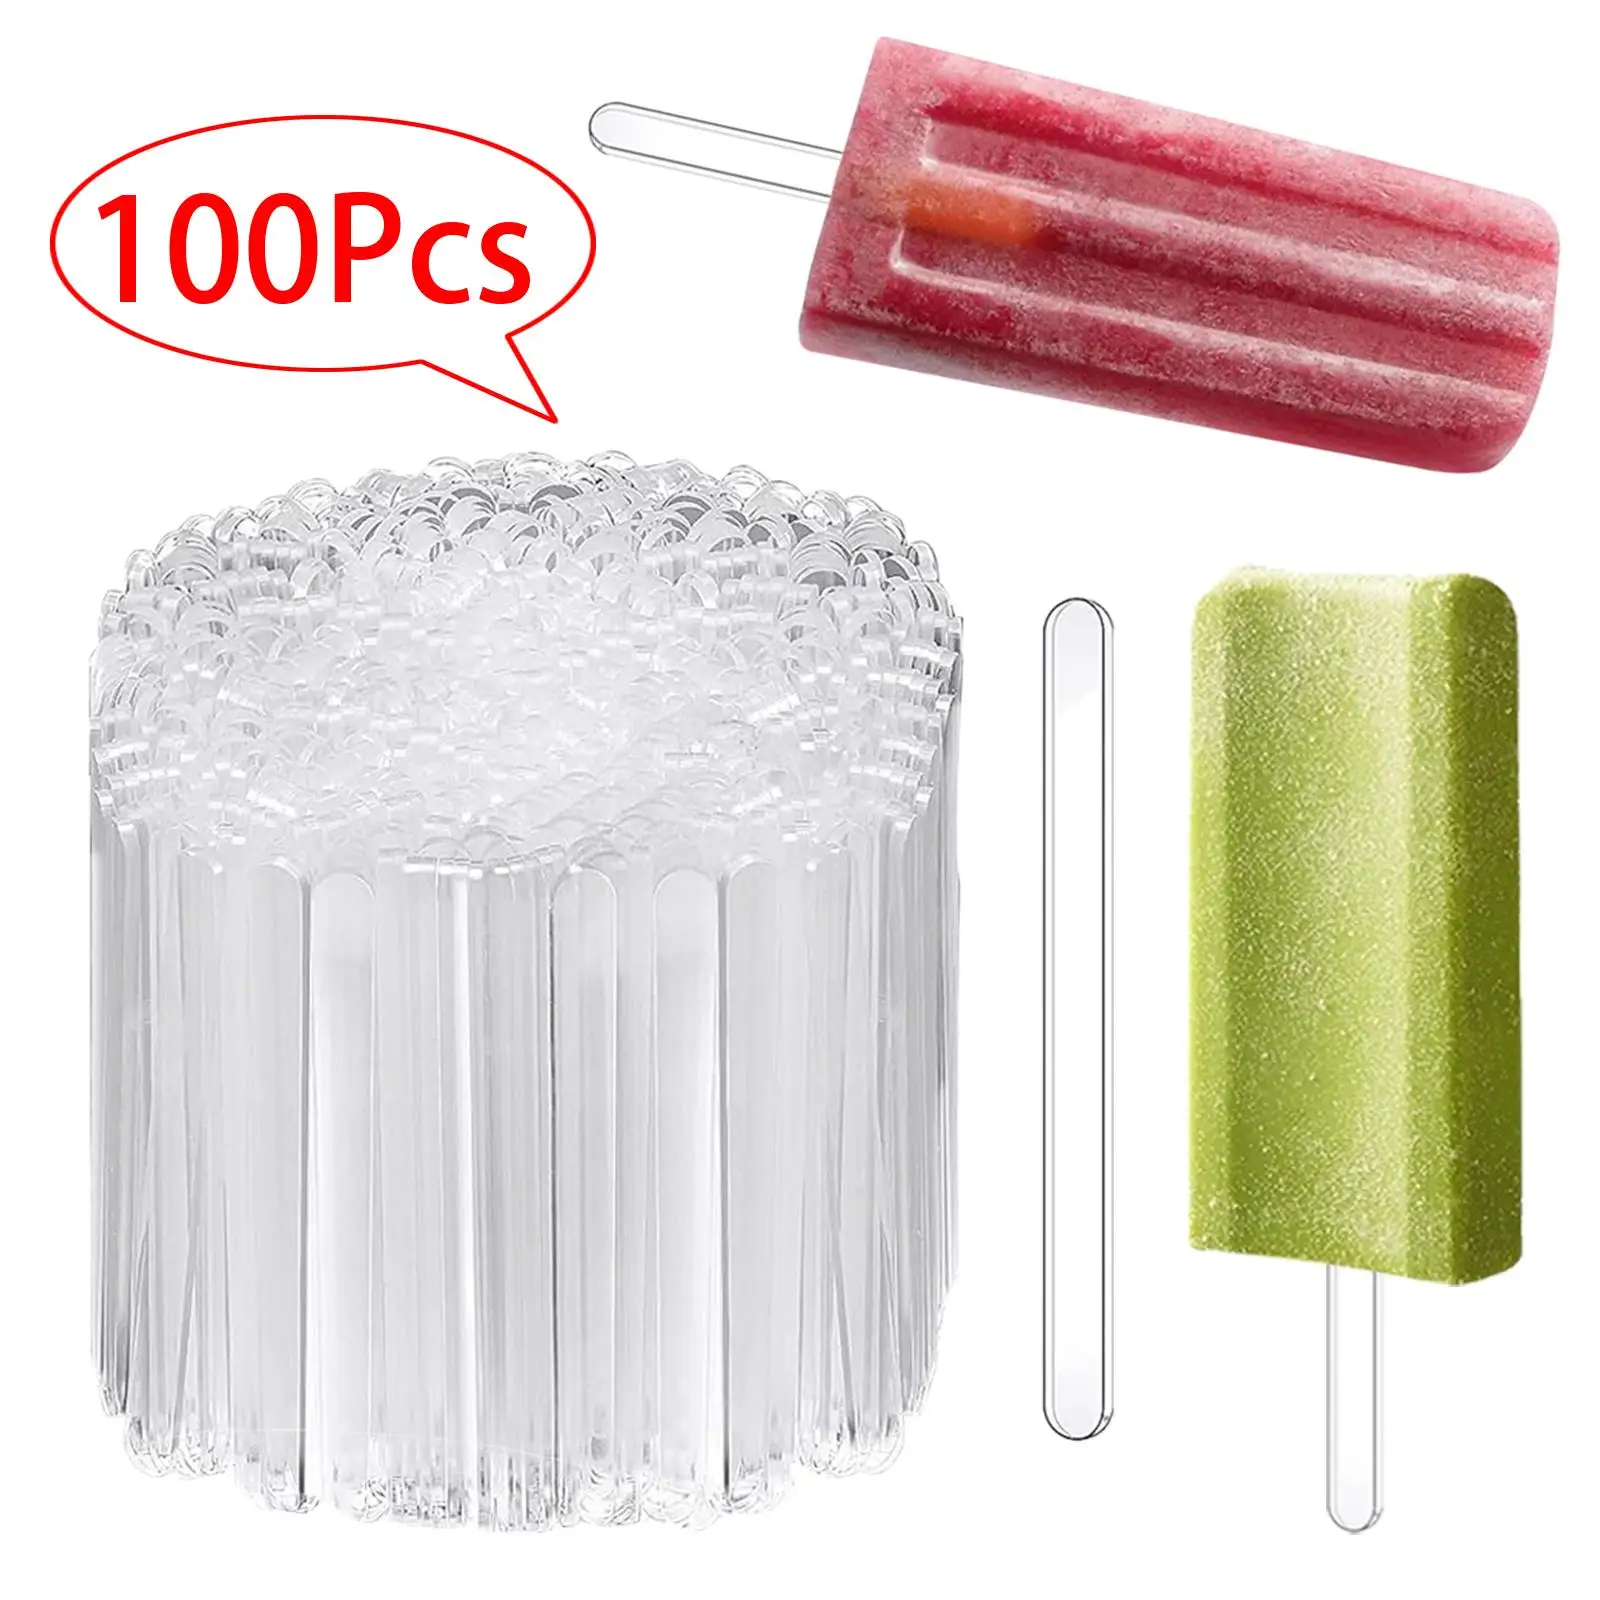 100 Pieces Popsicle Sticks Acrylic Ice Bar Sticks for Party DIY Crafts Snack